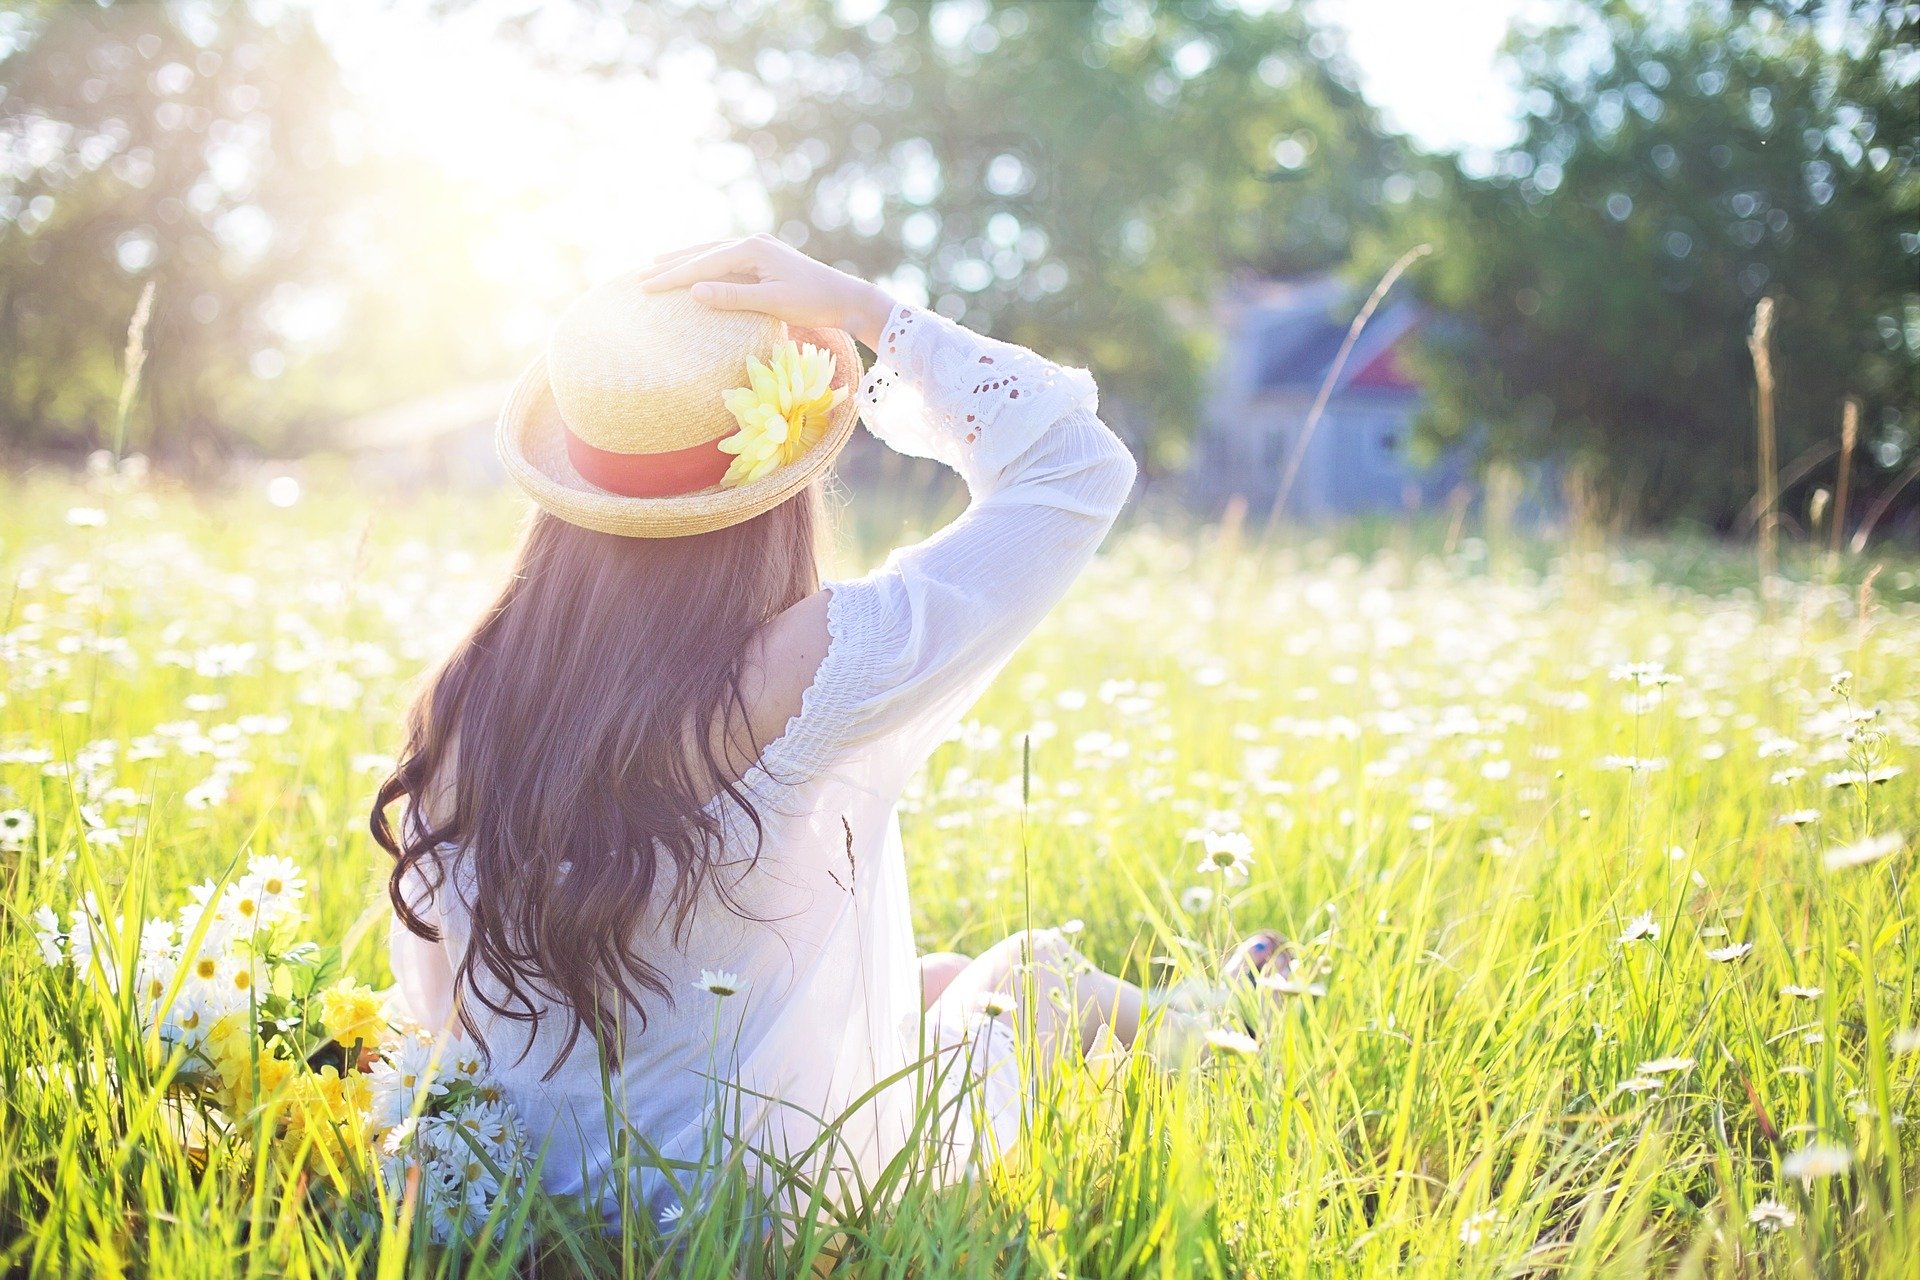 woman with a sunflower in her hat sat in a field of grass on a sunny day